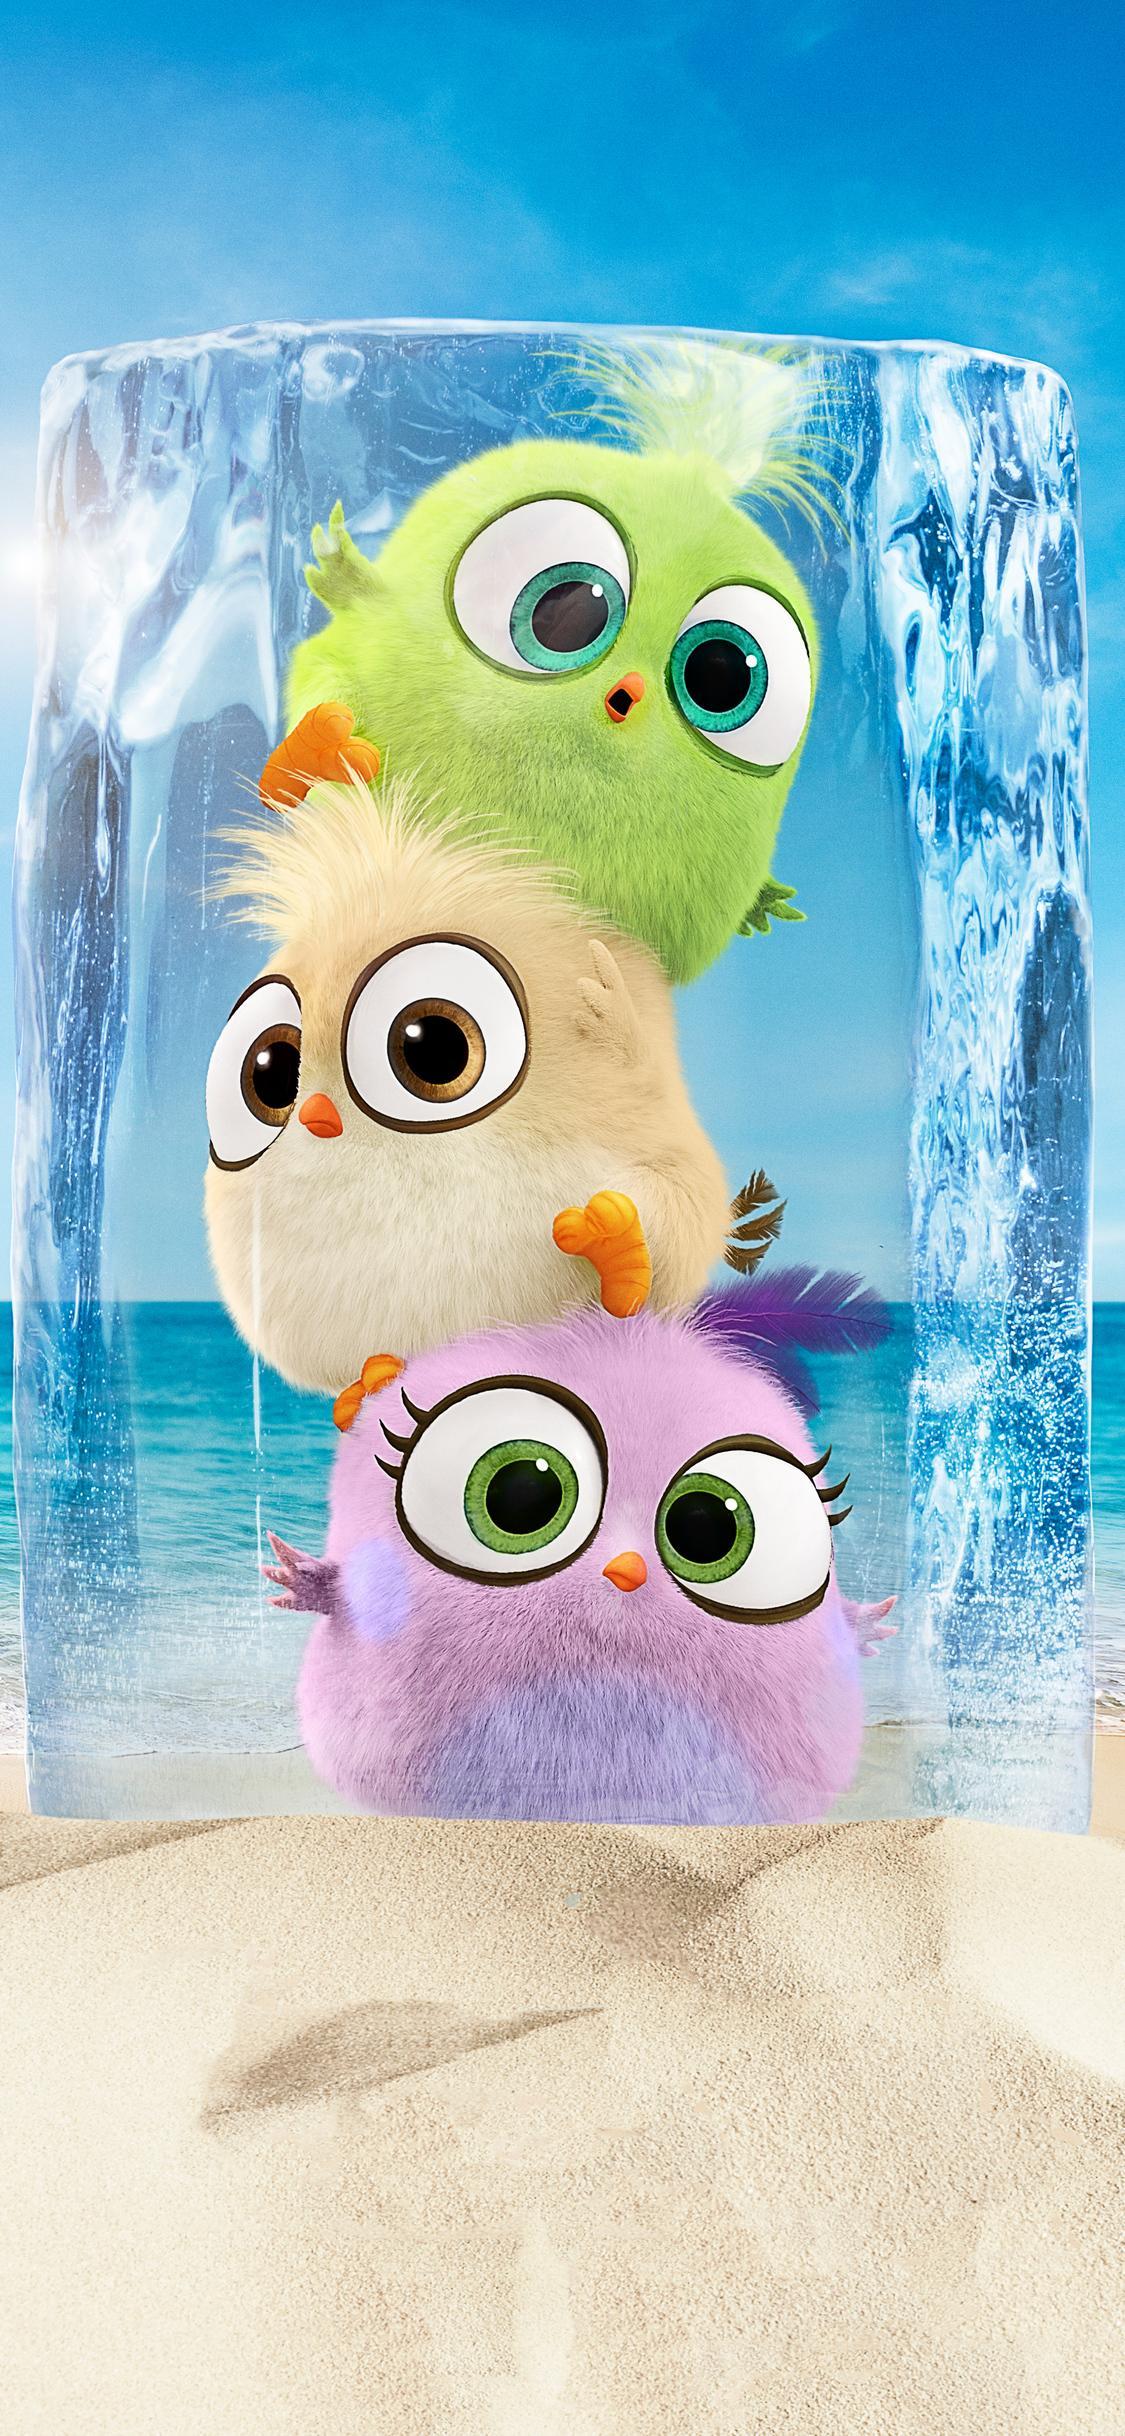 Hatchlings In The Angry Birds Movie 2 iPhone XS